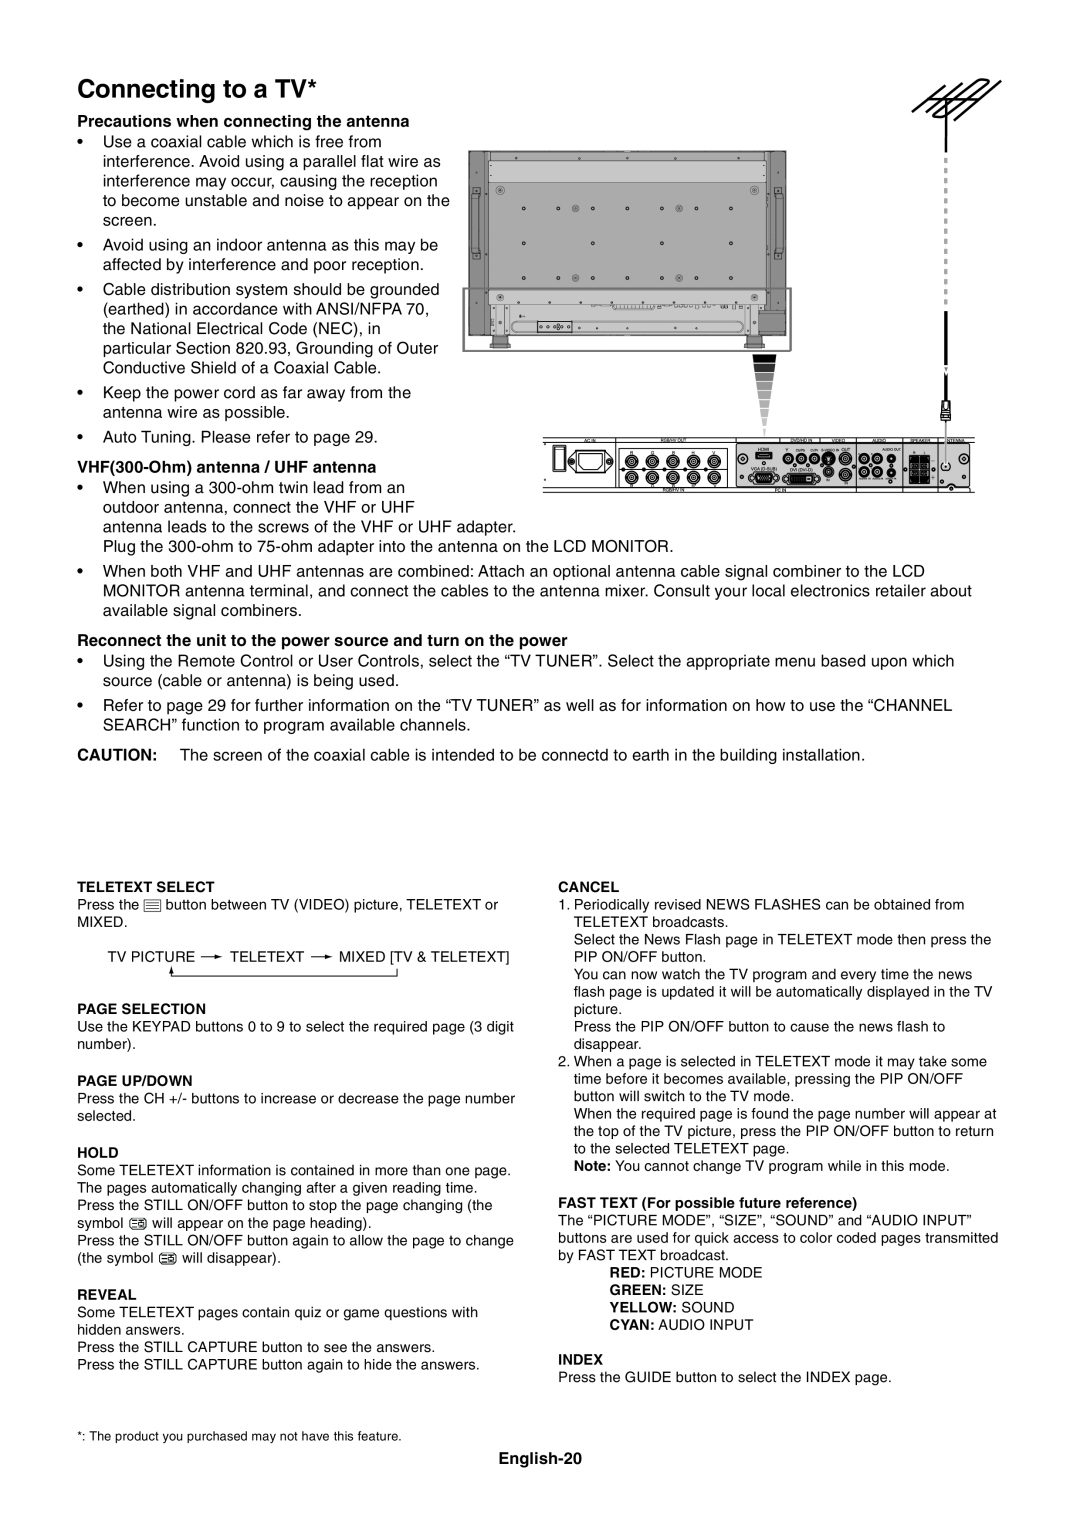 NEC LCD4020, LCD4620 user manual Connecting to a TV, Precautions when connecting the antenna, English-20 